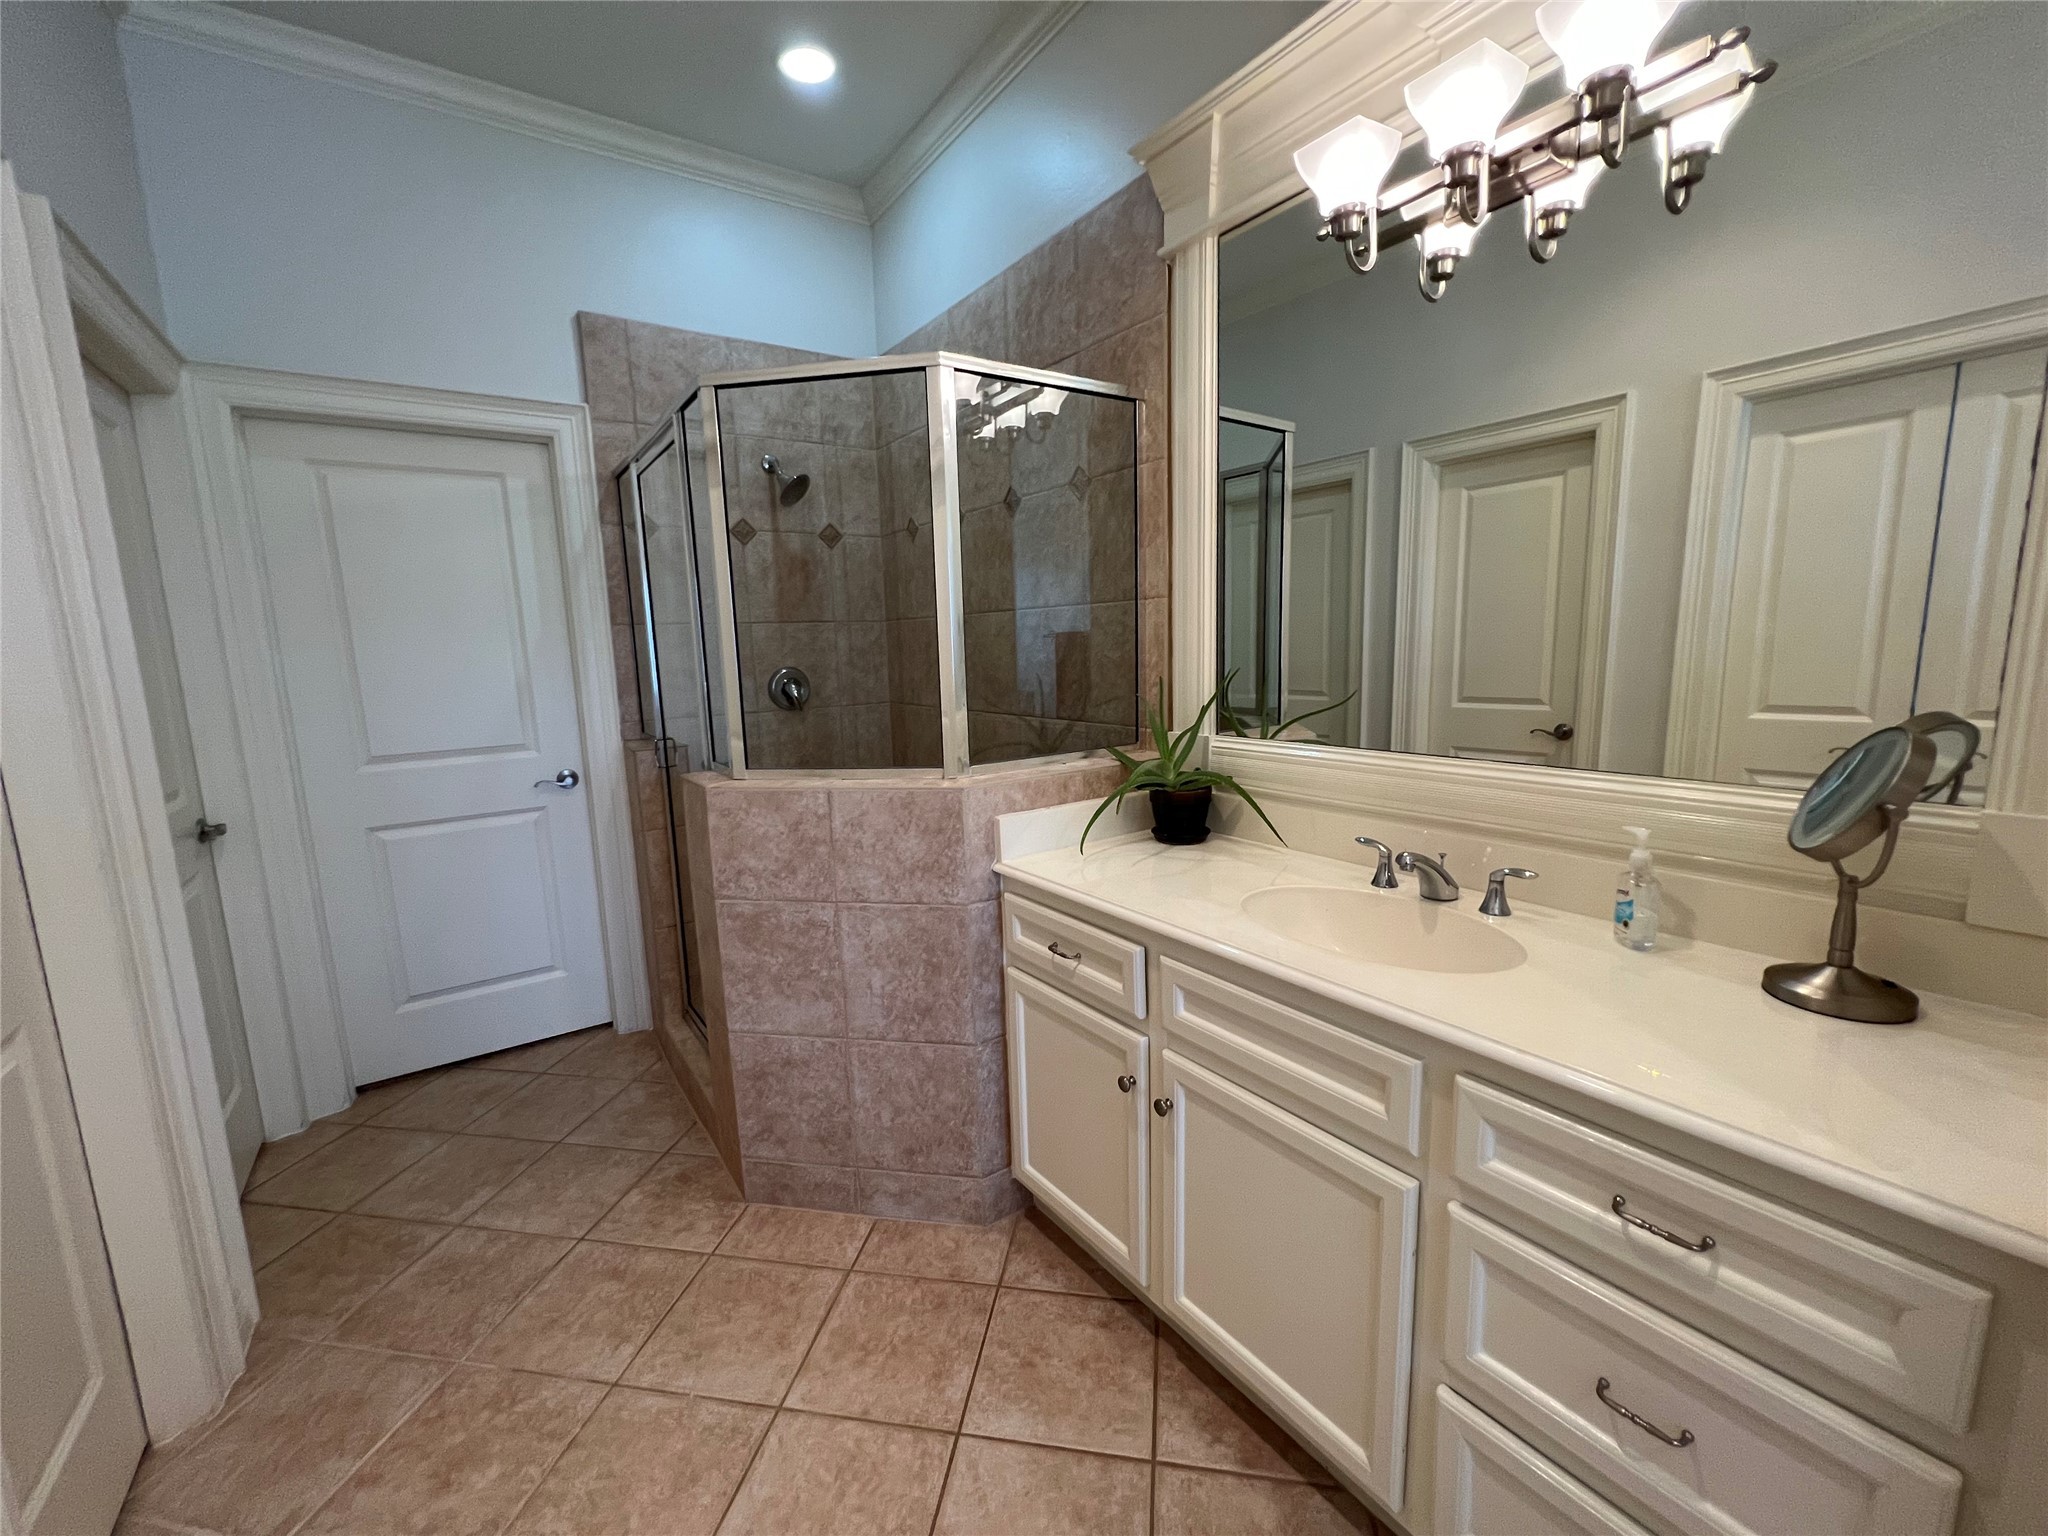 Primary bathroom with two vanity areas. Sunken tub with jets on one end and shower on the other.